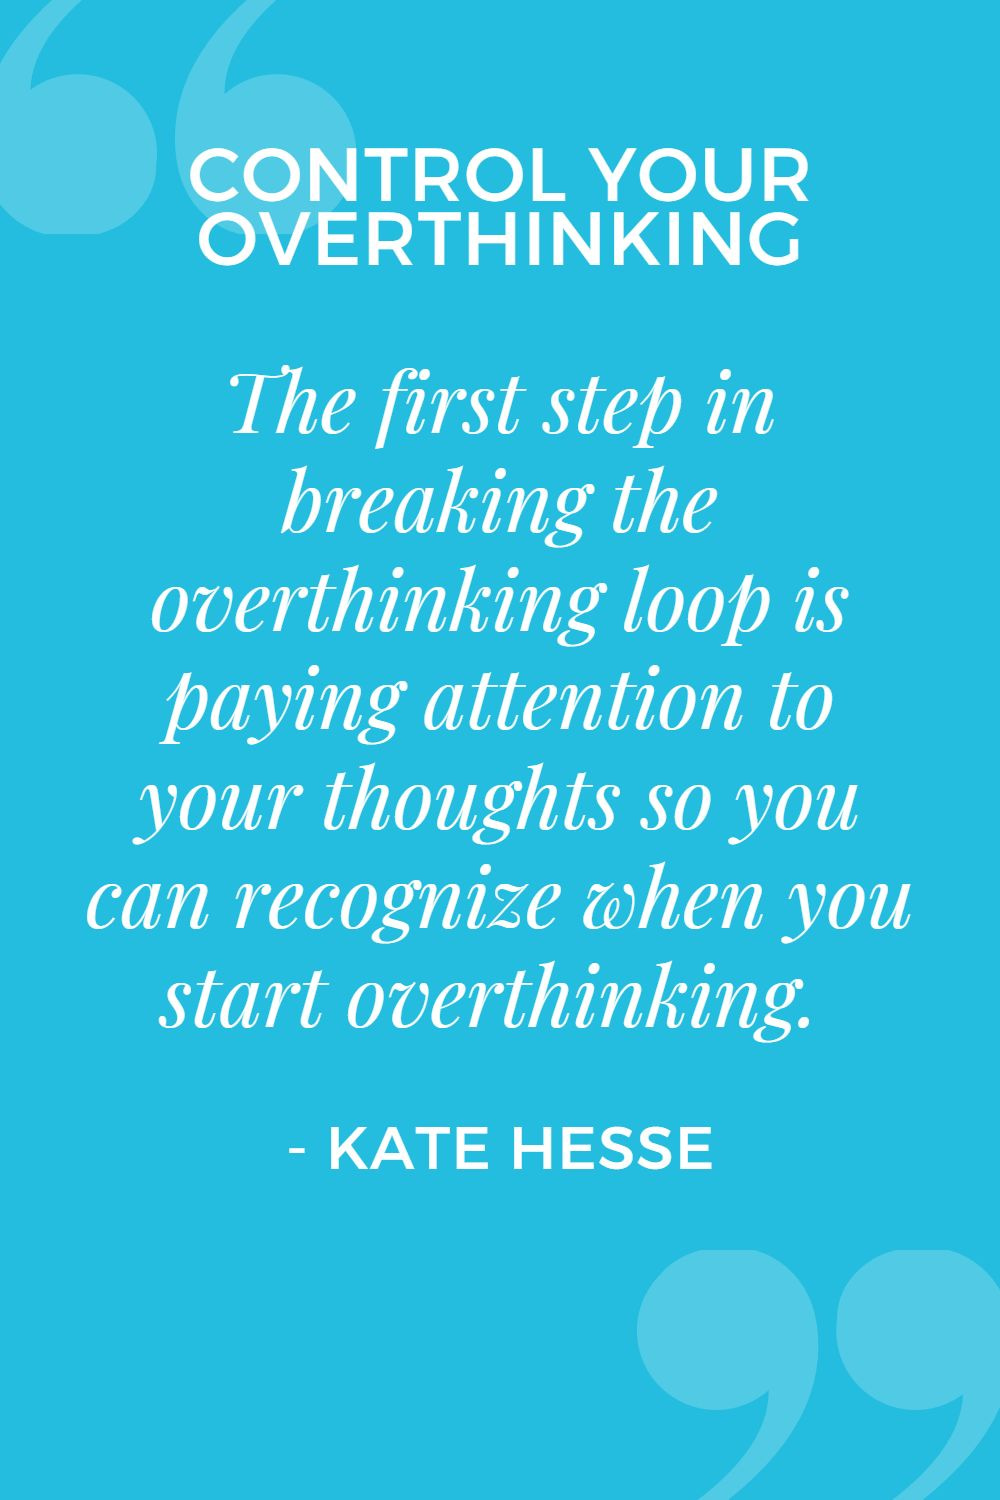 The first step in breaking the overthinking loop is paying attention to your thoughts so you can recognize when you start overthinking.